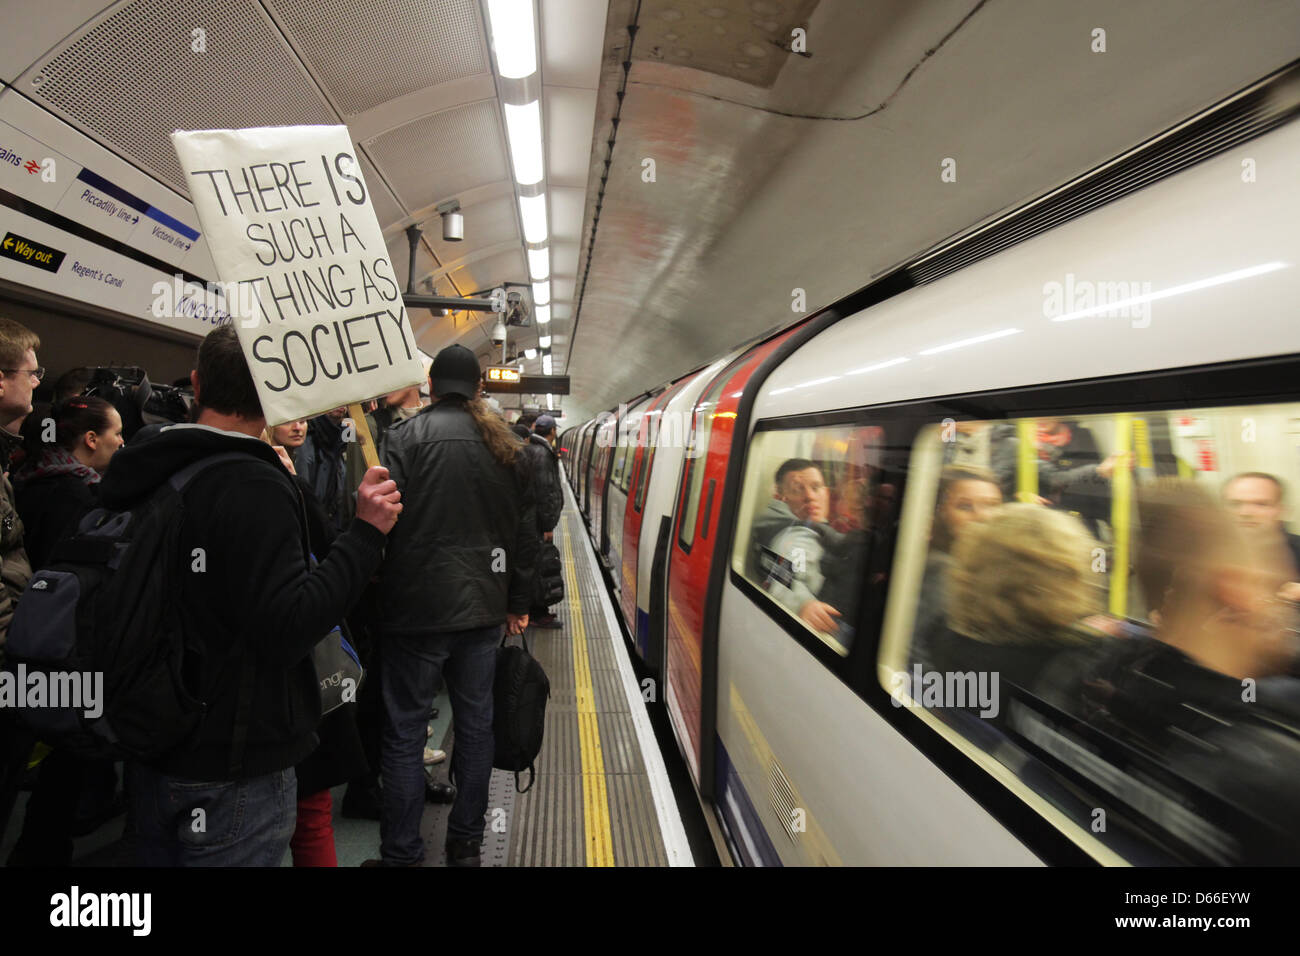 London, UK. 13th April 2013.  Protesters boarding an underground train on the way to Lord Freud's London home. Lord Freud is Welfare Minister and a key proponent of the 'bedroom tax'.Credit: Rob Pinney/Alamy Live News Stock Photo